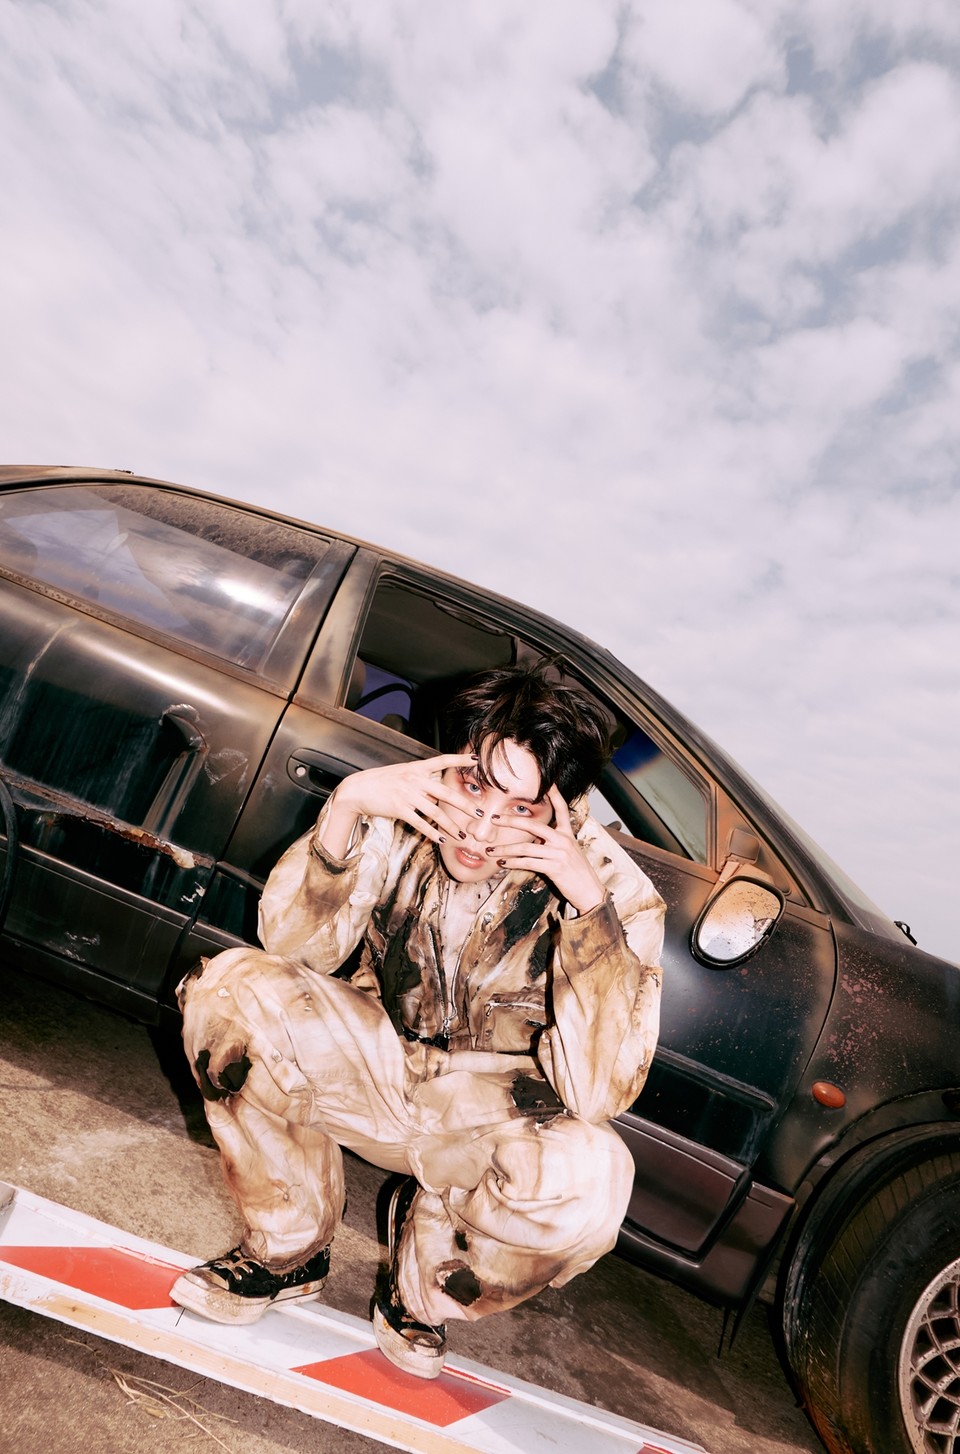 J-Hope of BTS unveils title of upcoming solo single, grungy teaser photos